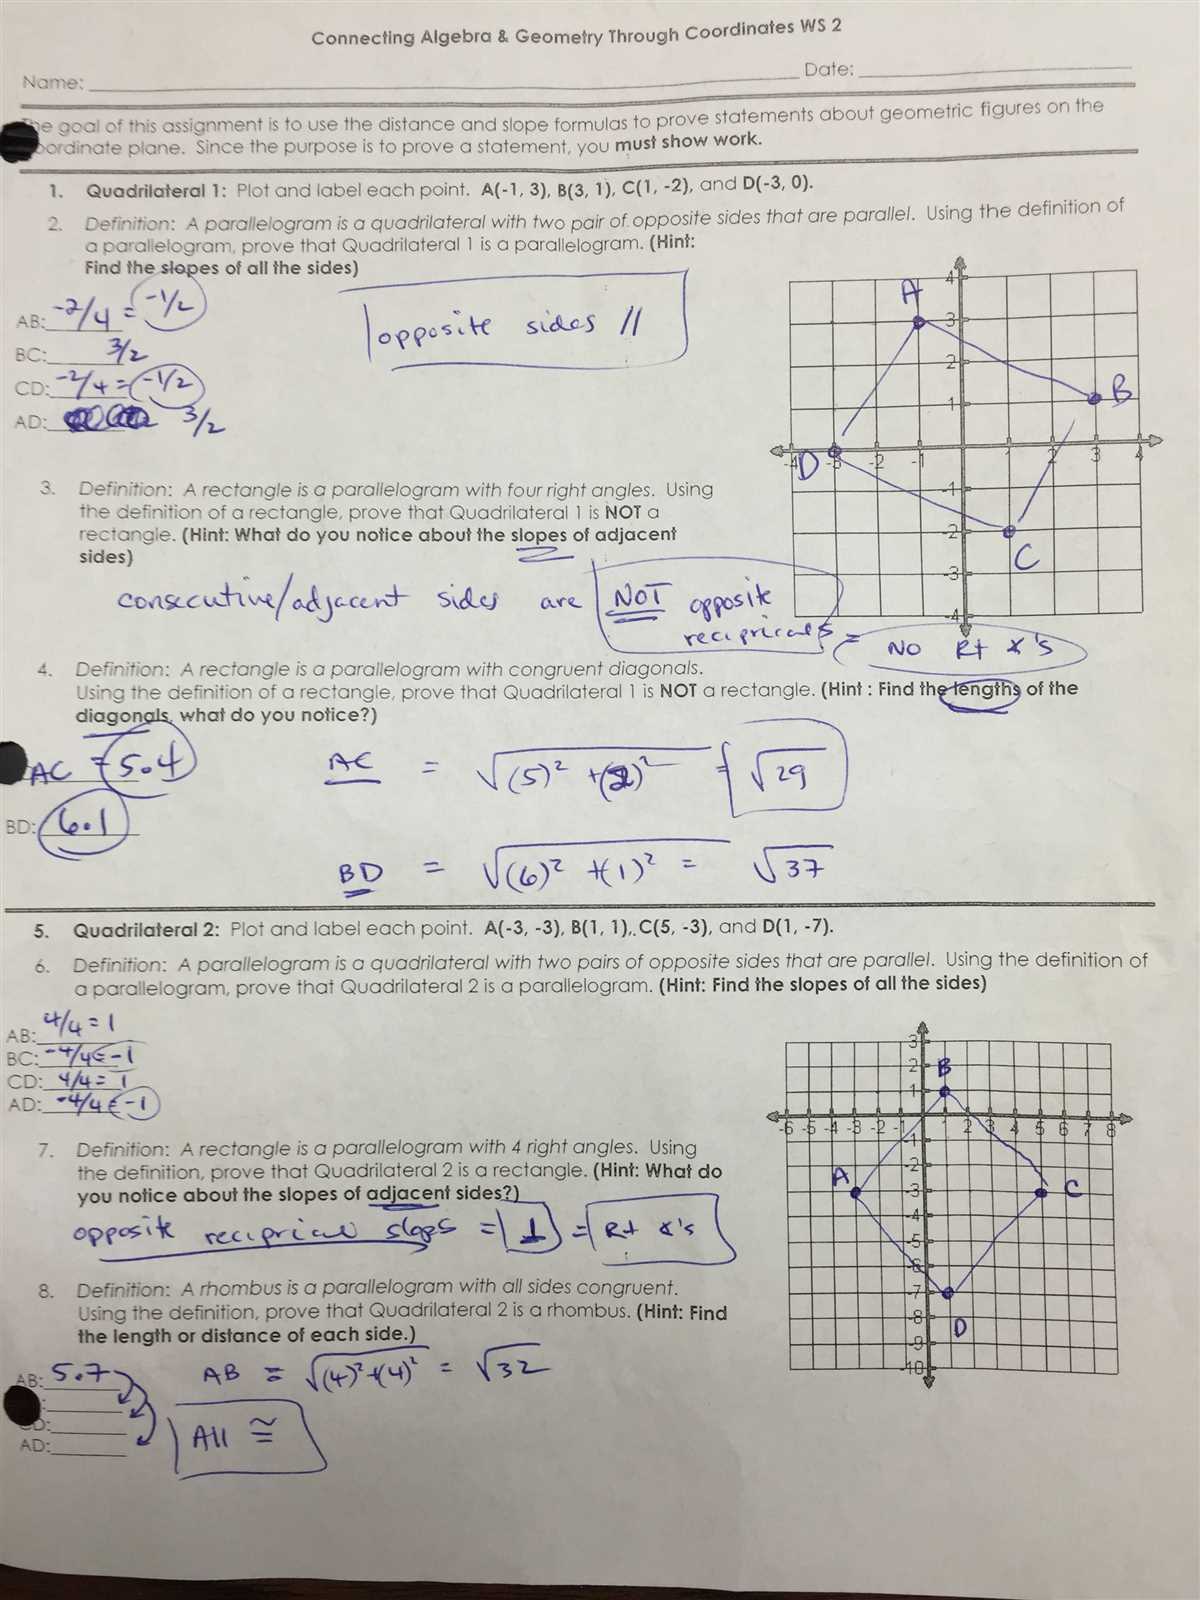 Check Your Work: Answer Key for Homework Problem 1